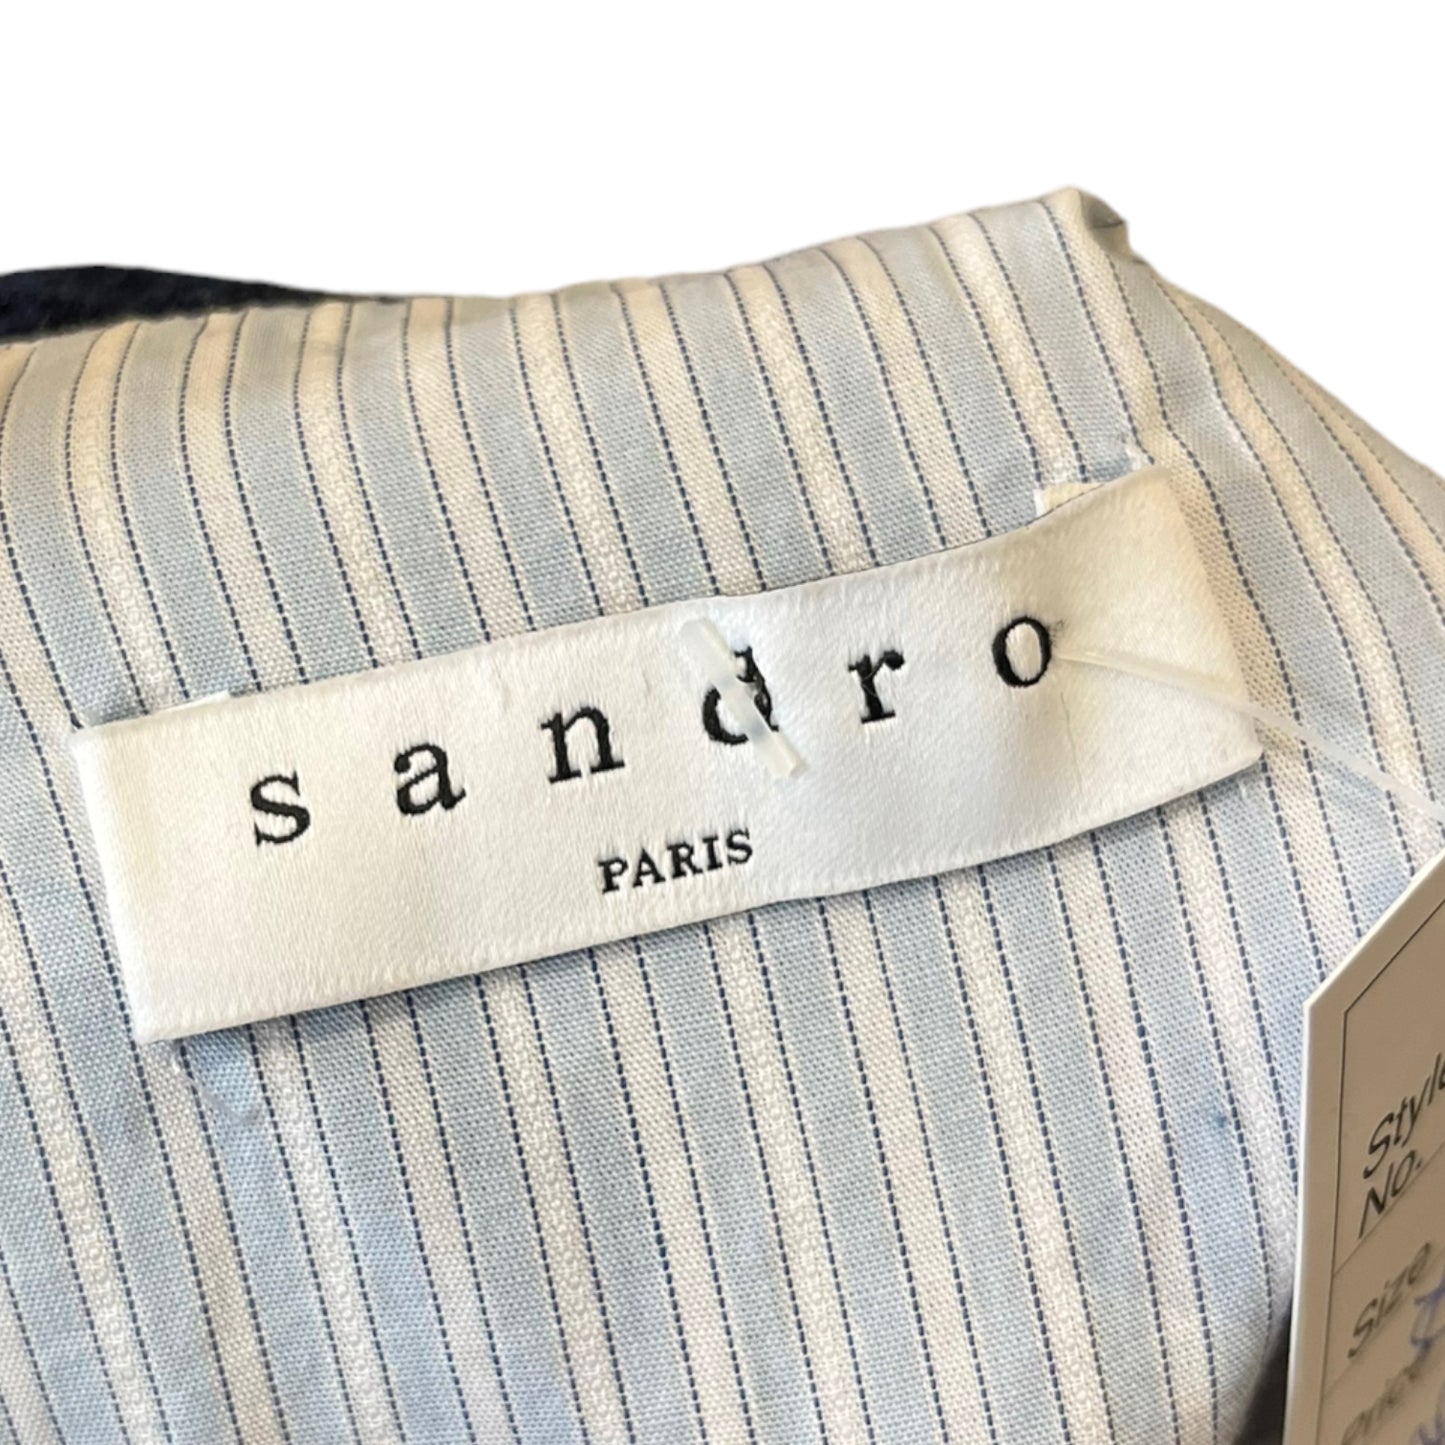 Sandro Blue Shirt with Navy Lace Overlay